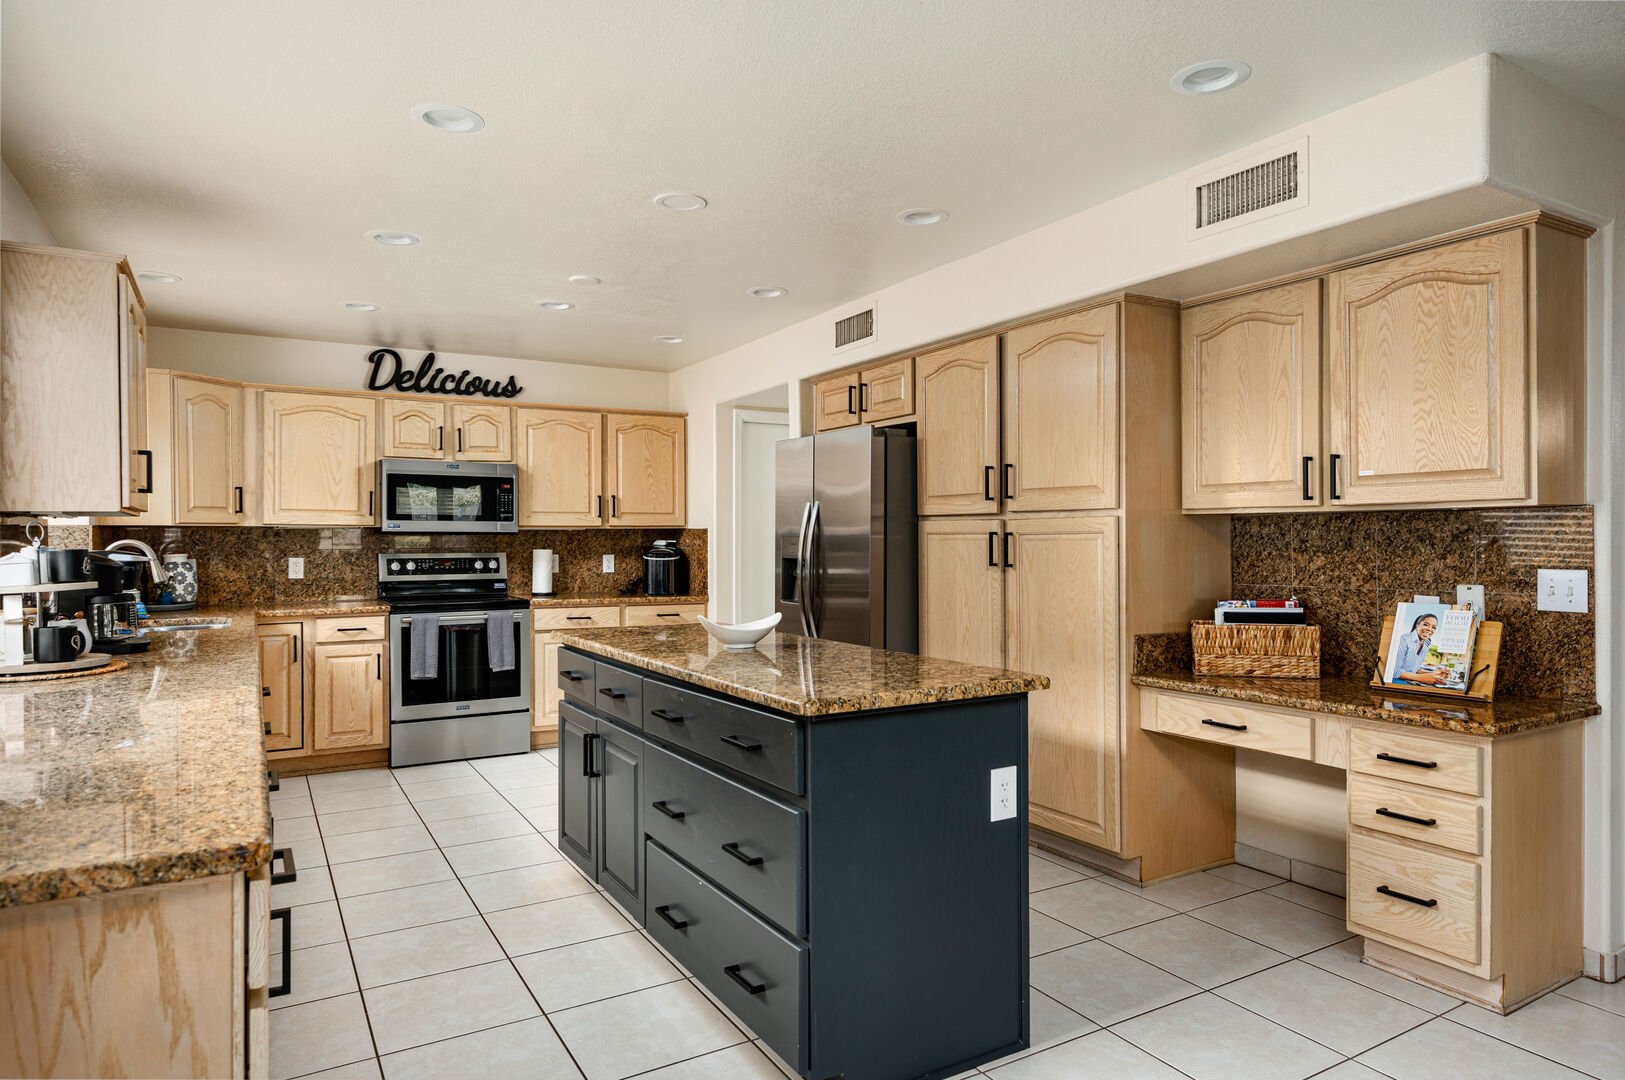 Spacious kitchen with all the necessities!